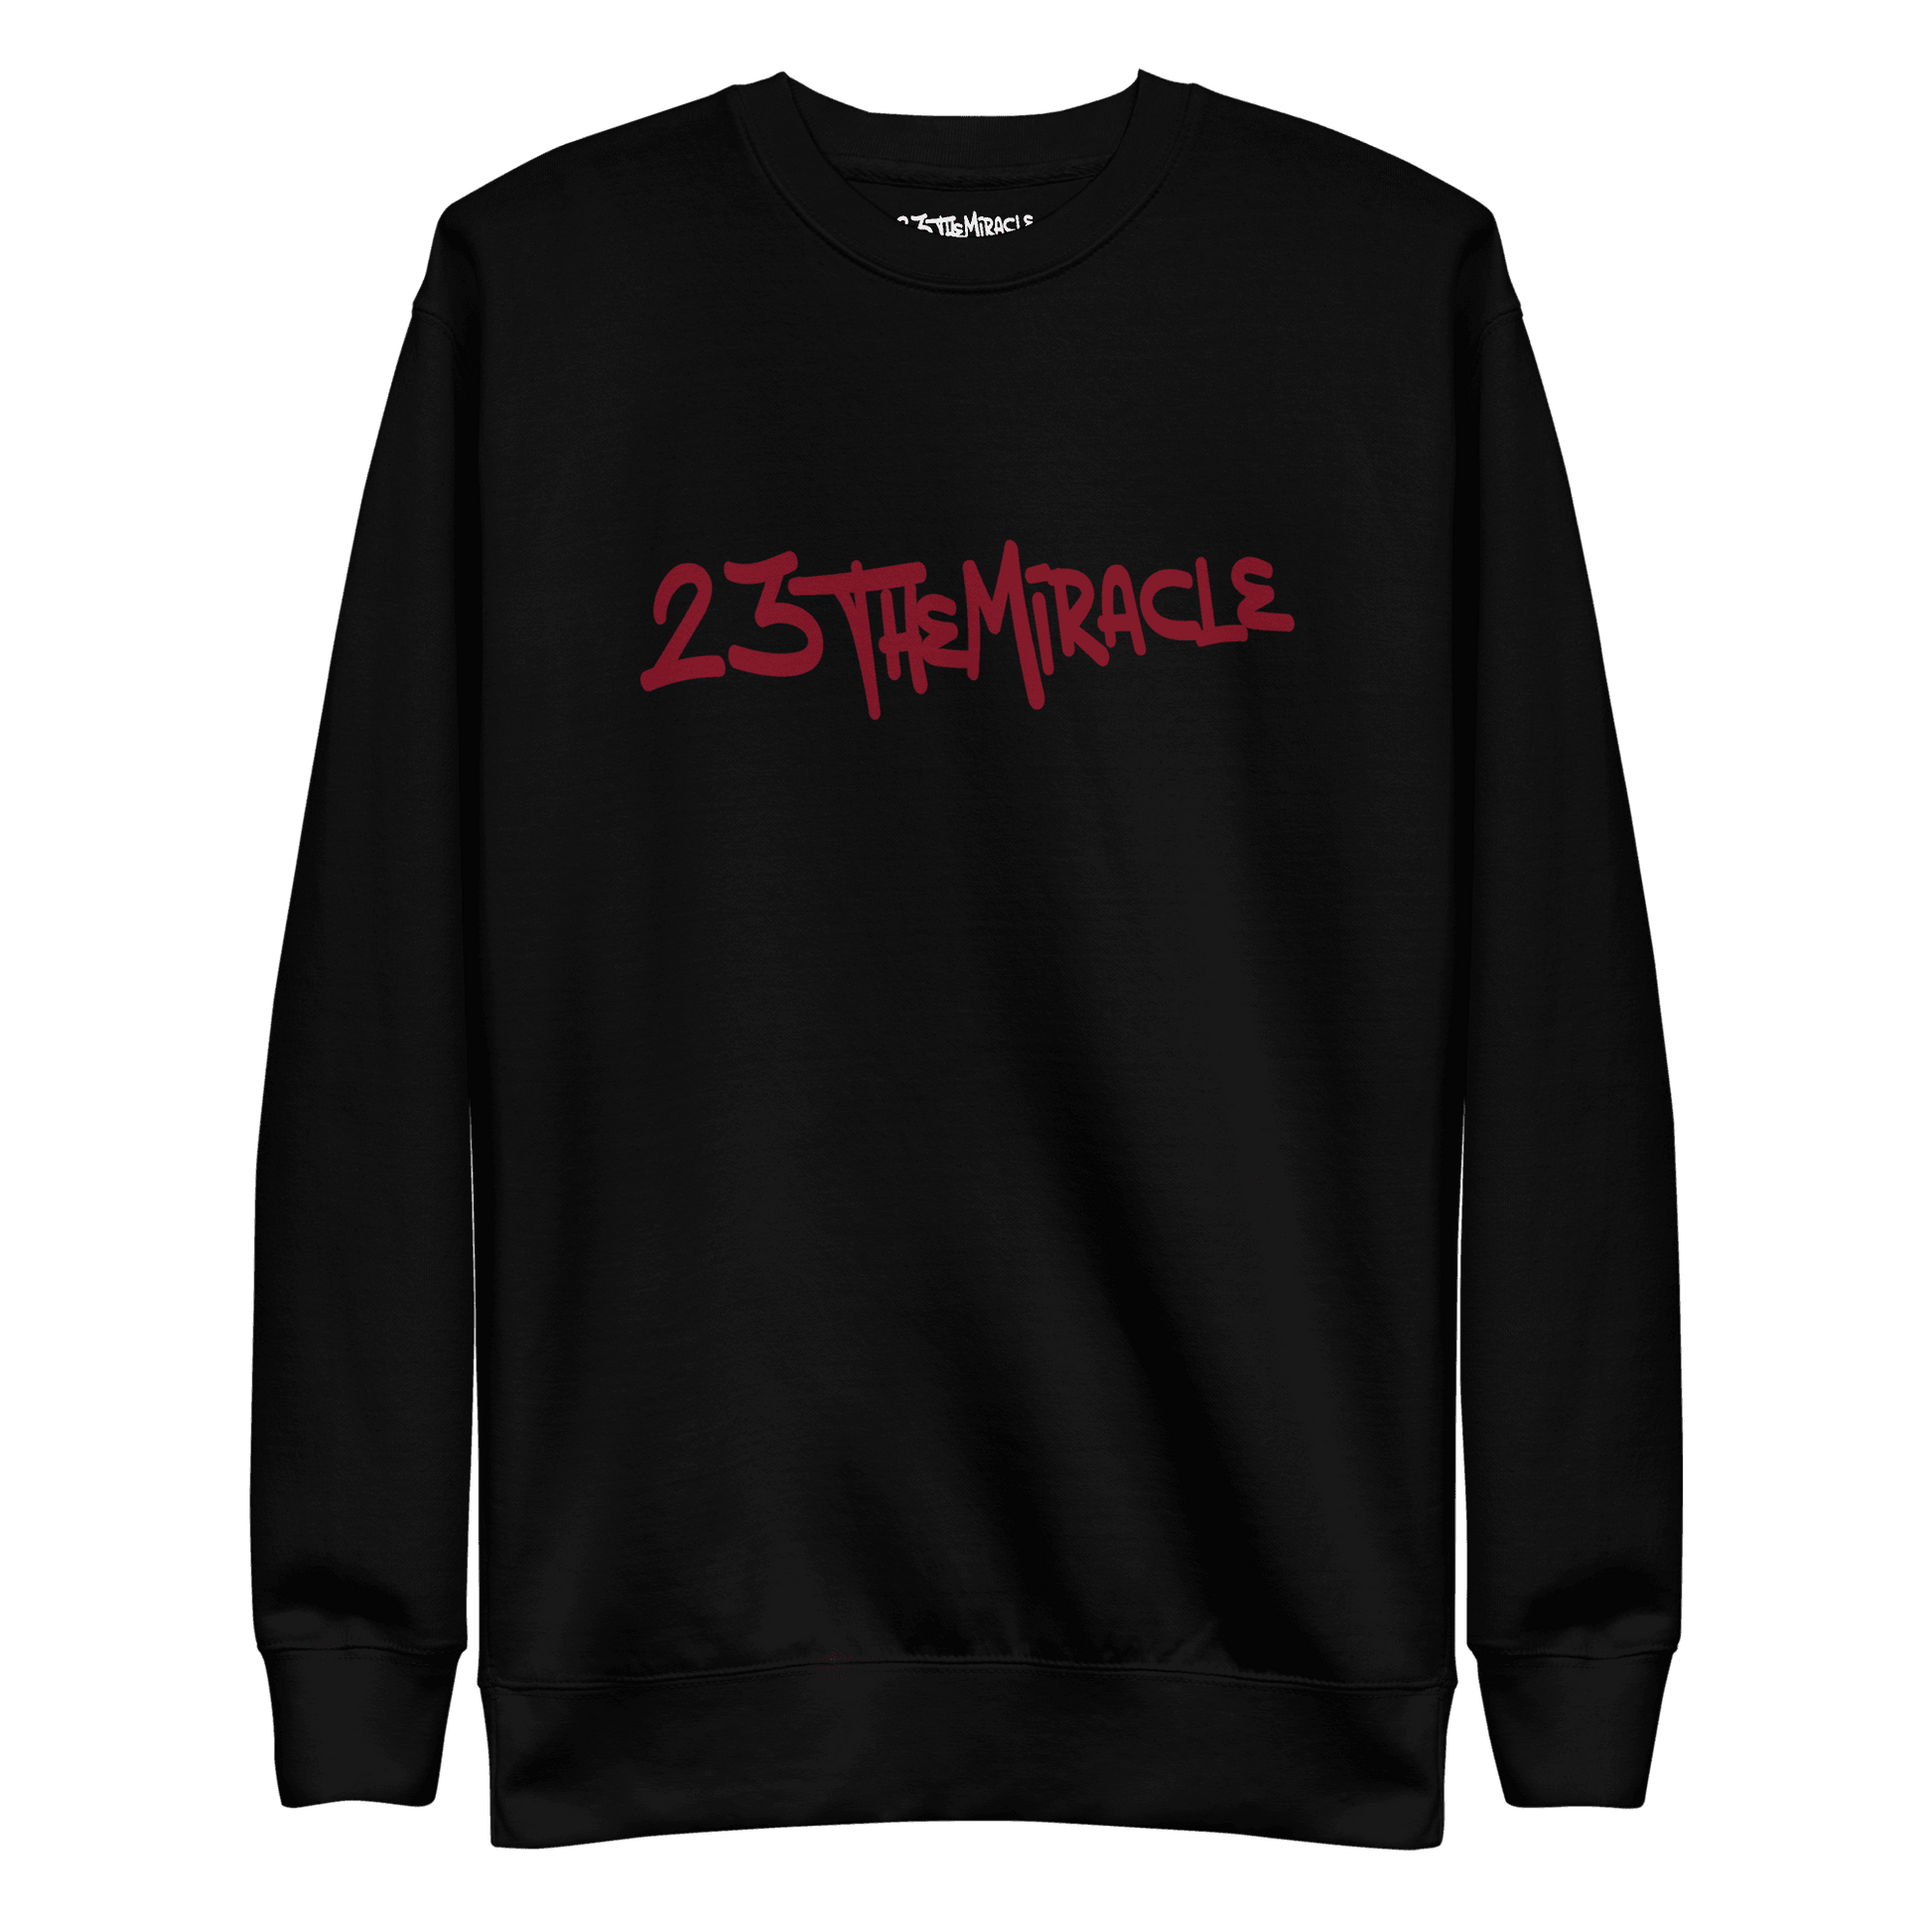 23 THEMIRACLE CREWNECK - 23 TheMiracle